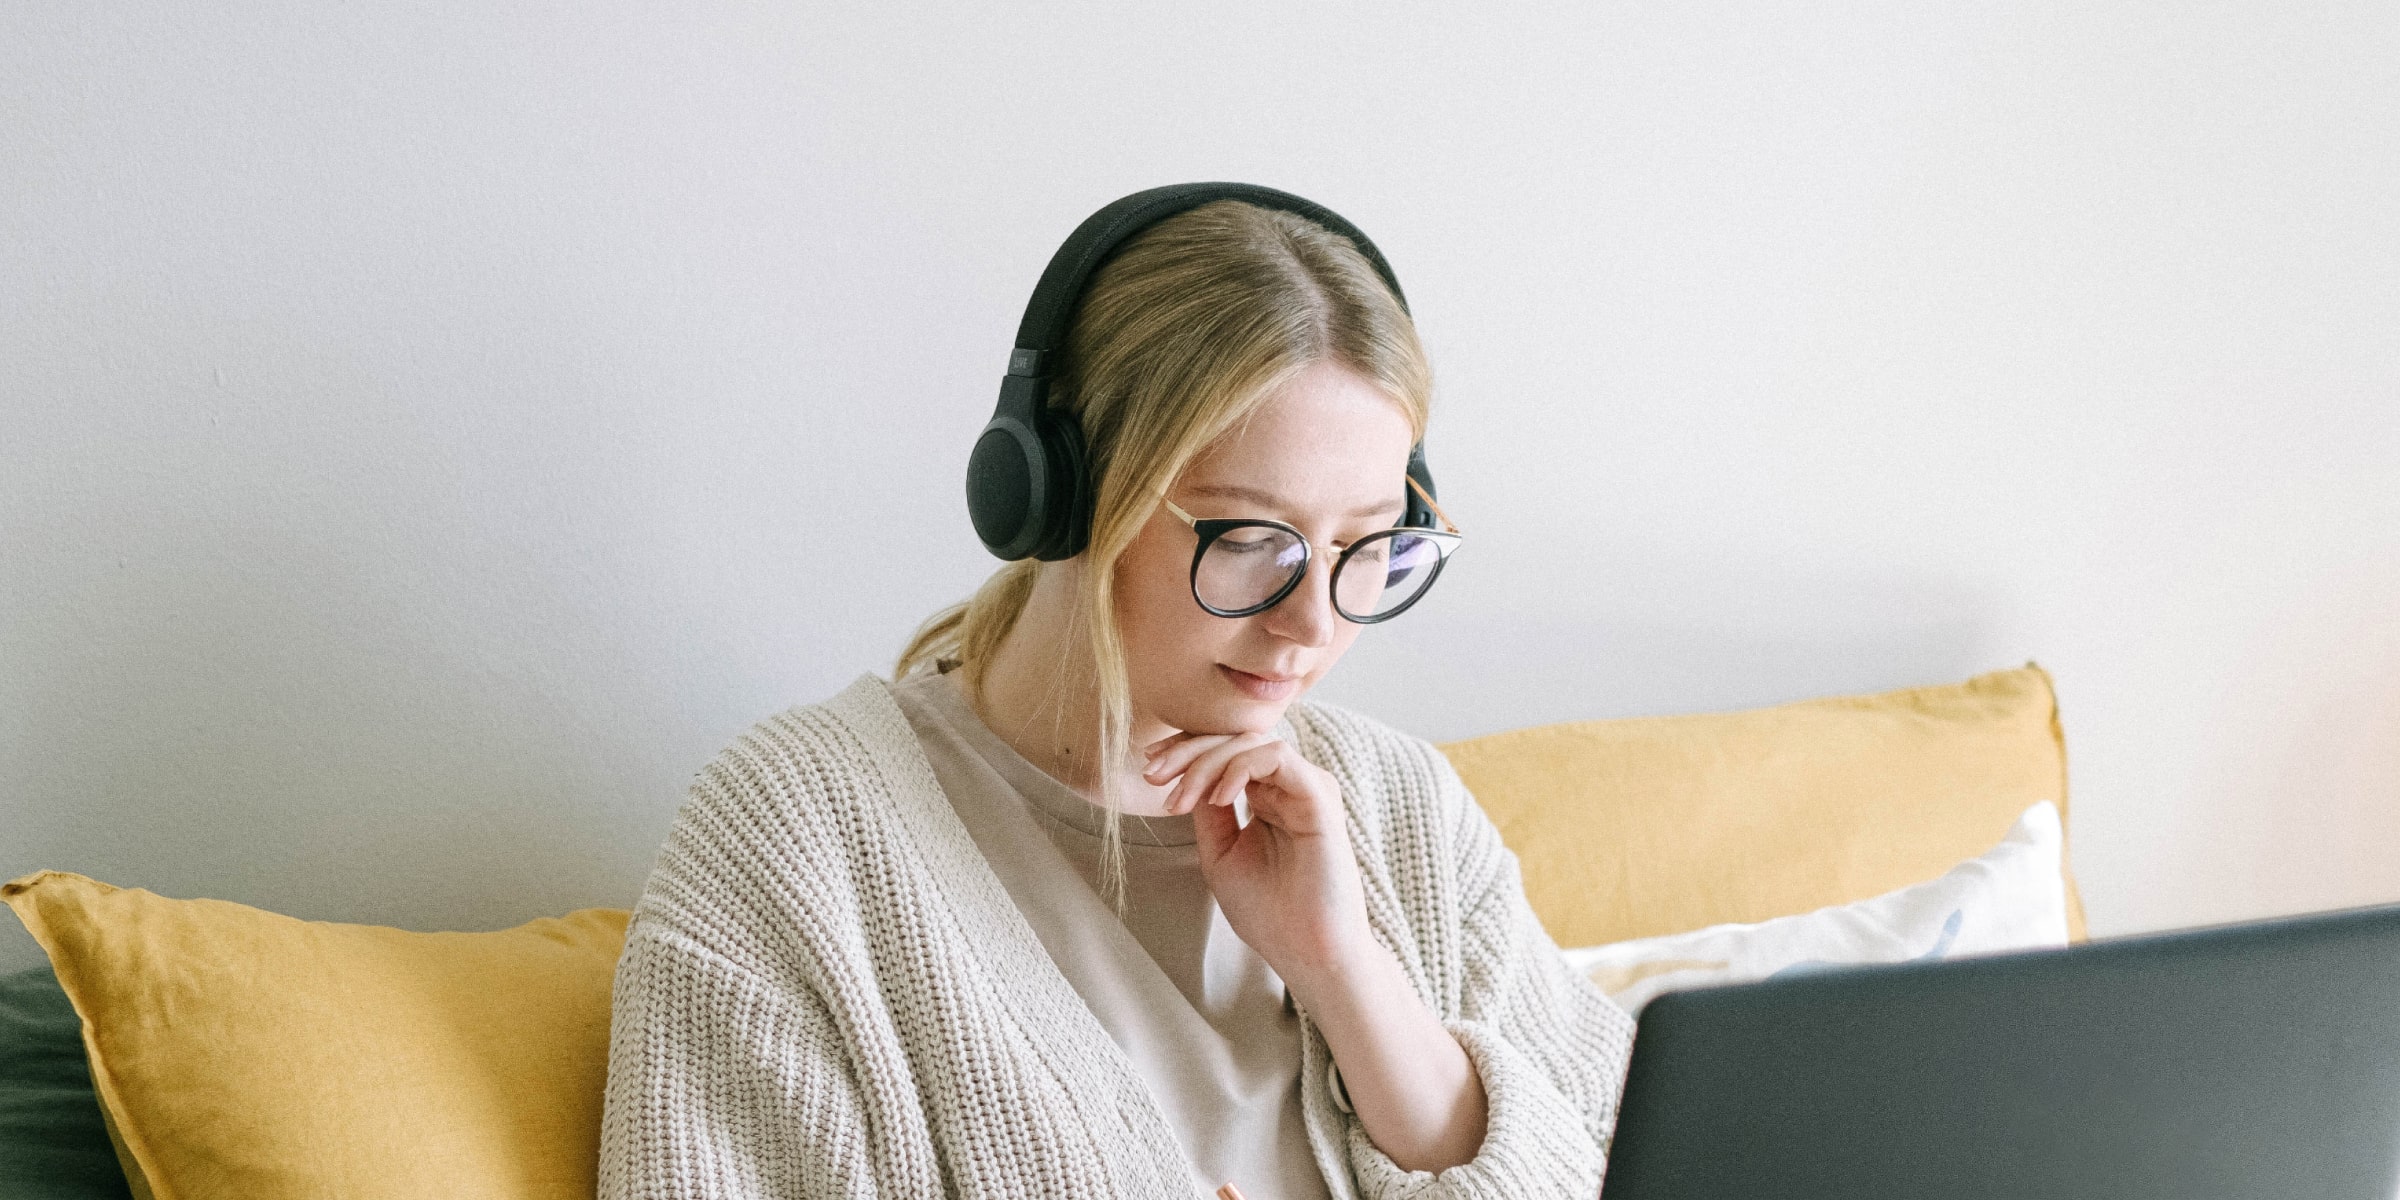 The best kind of music to help your ADHD brain focus